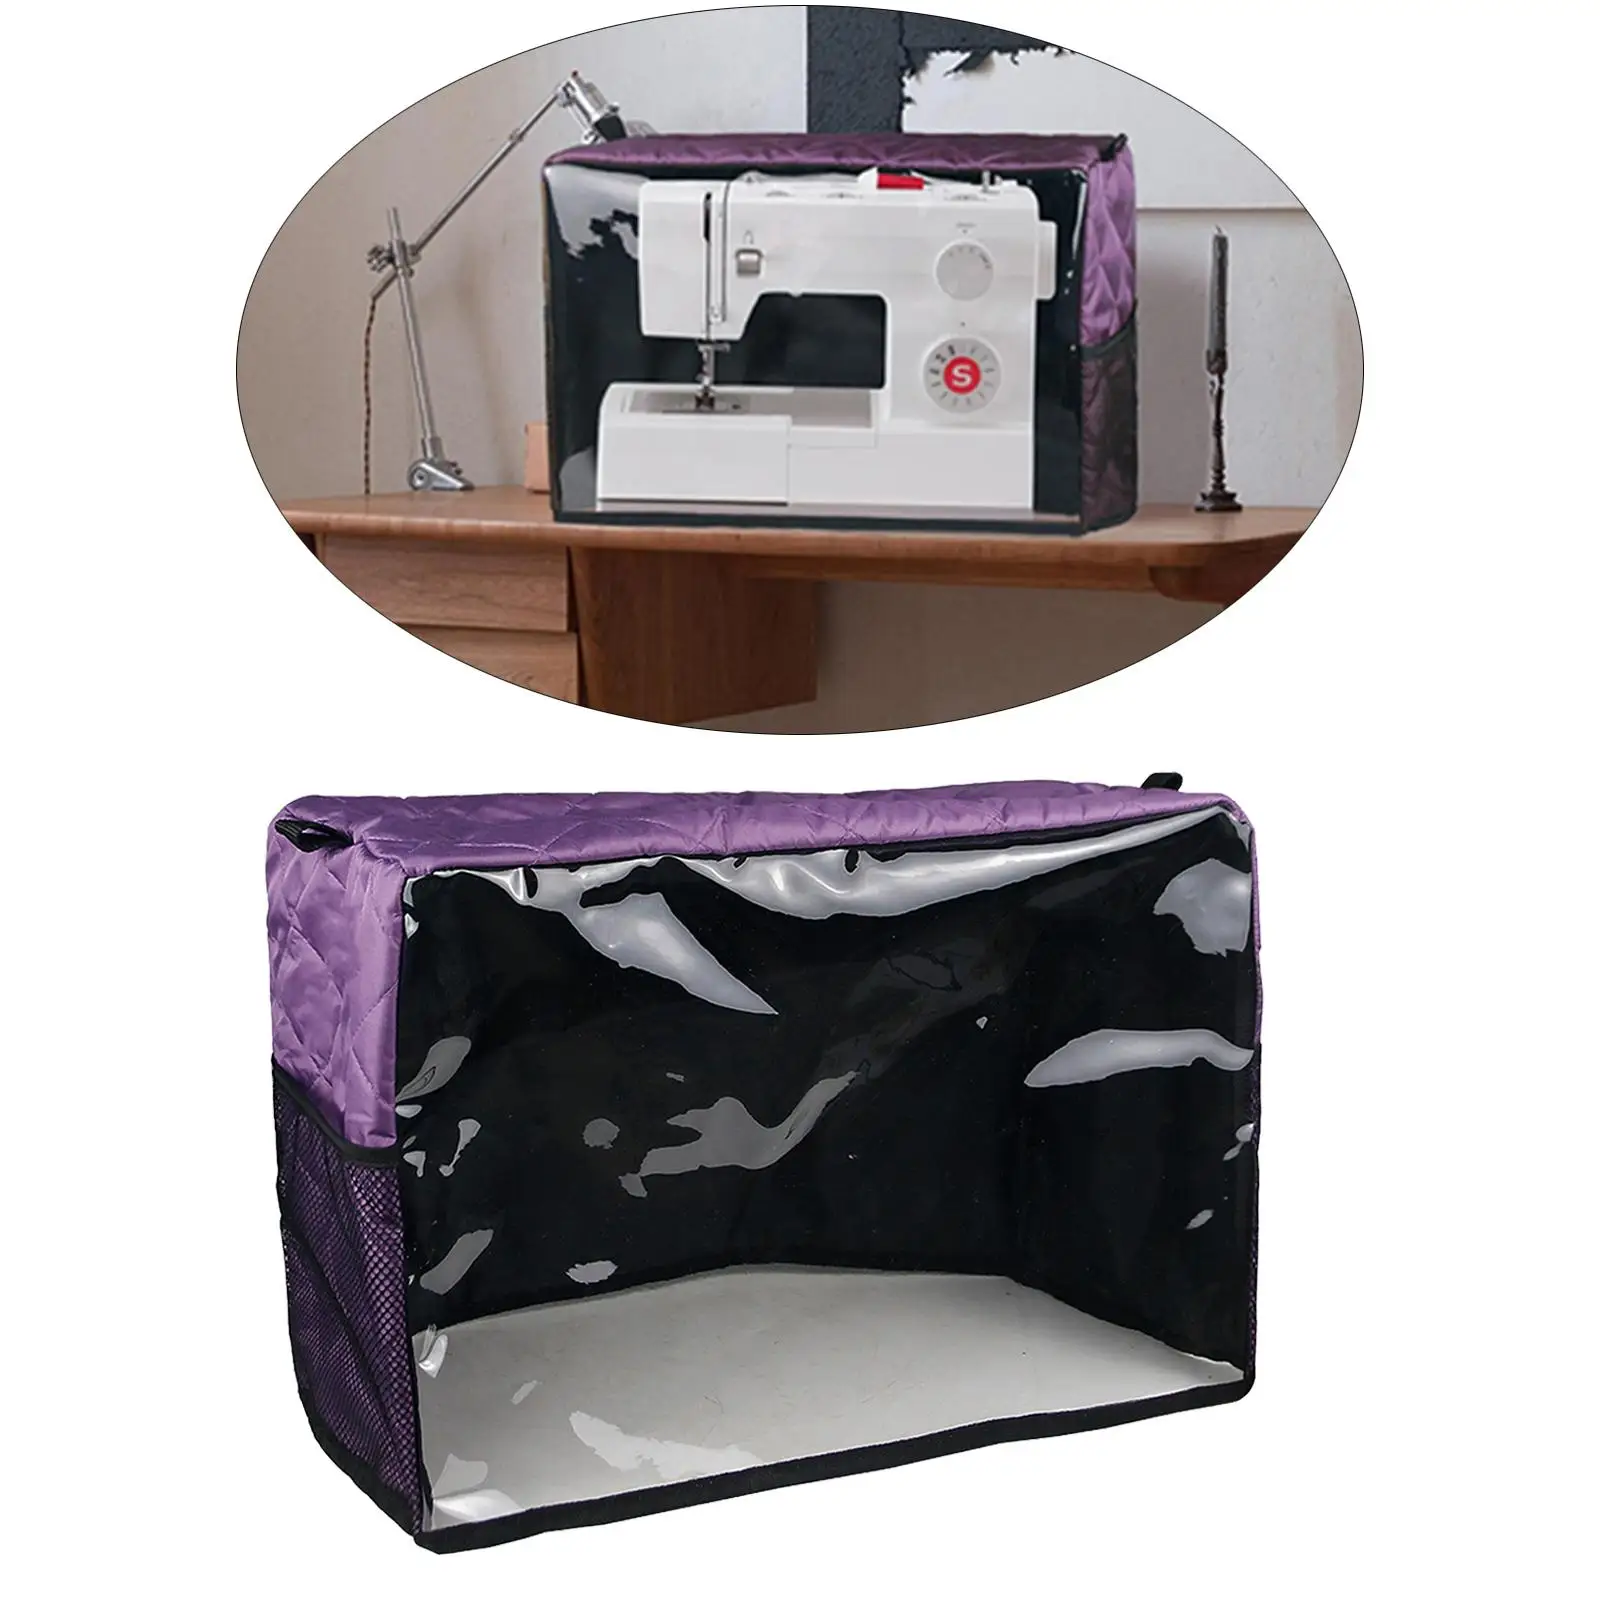 Sewing Machine Cover Protective Dust Cover Waterproof for Sewing Machine